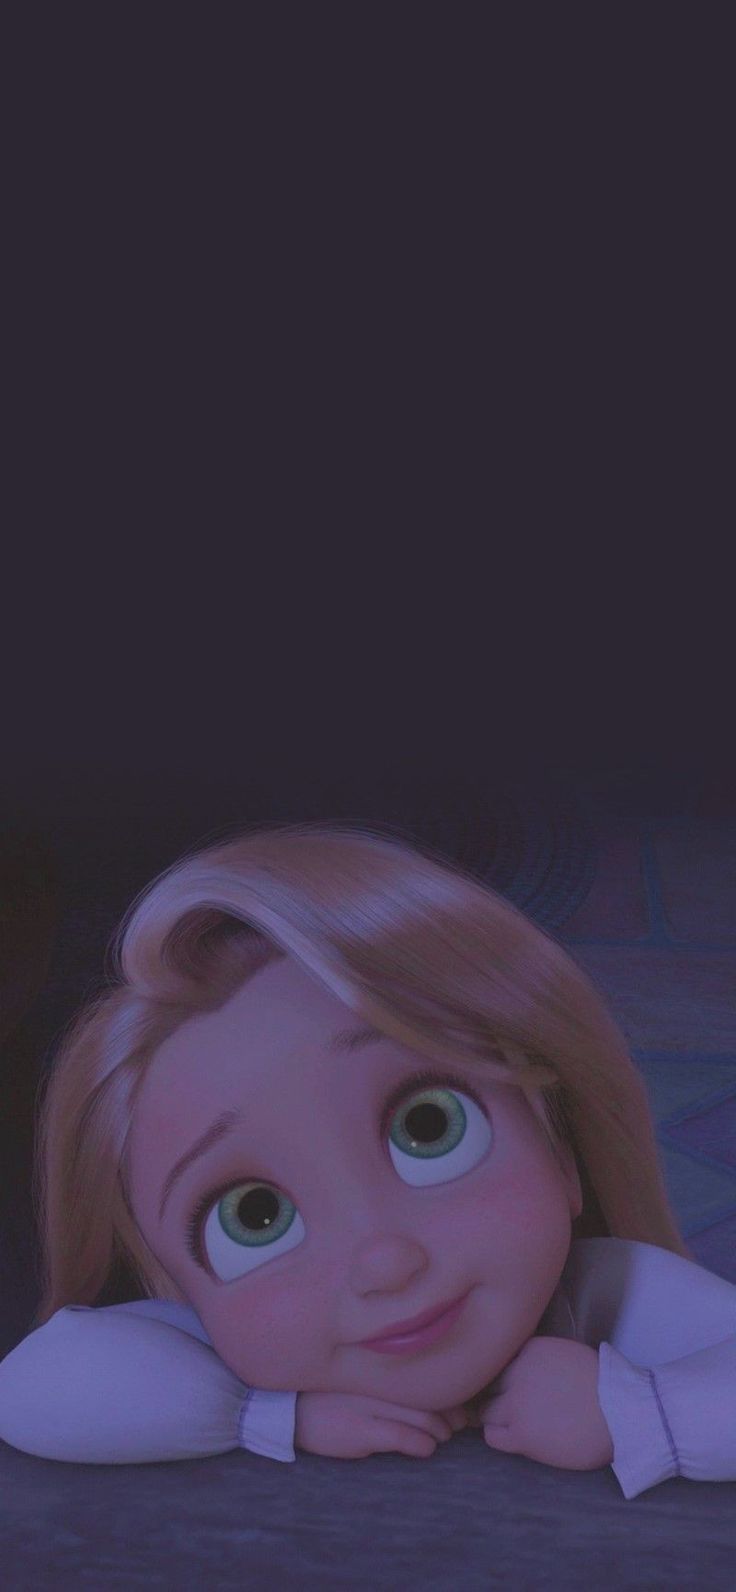 Rapunzel from Tangled, she's so cute in this picture - Disney